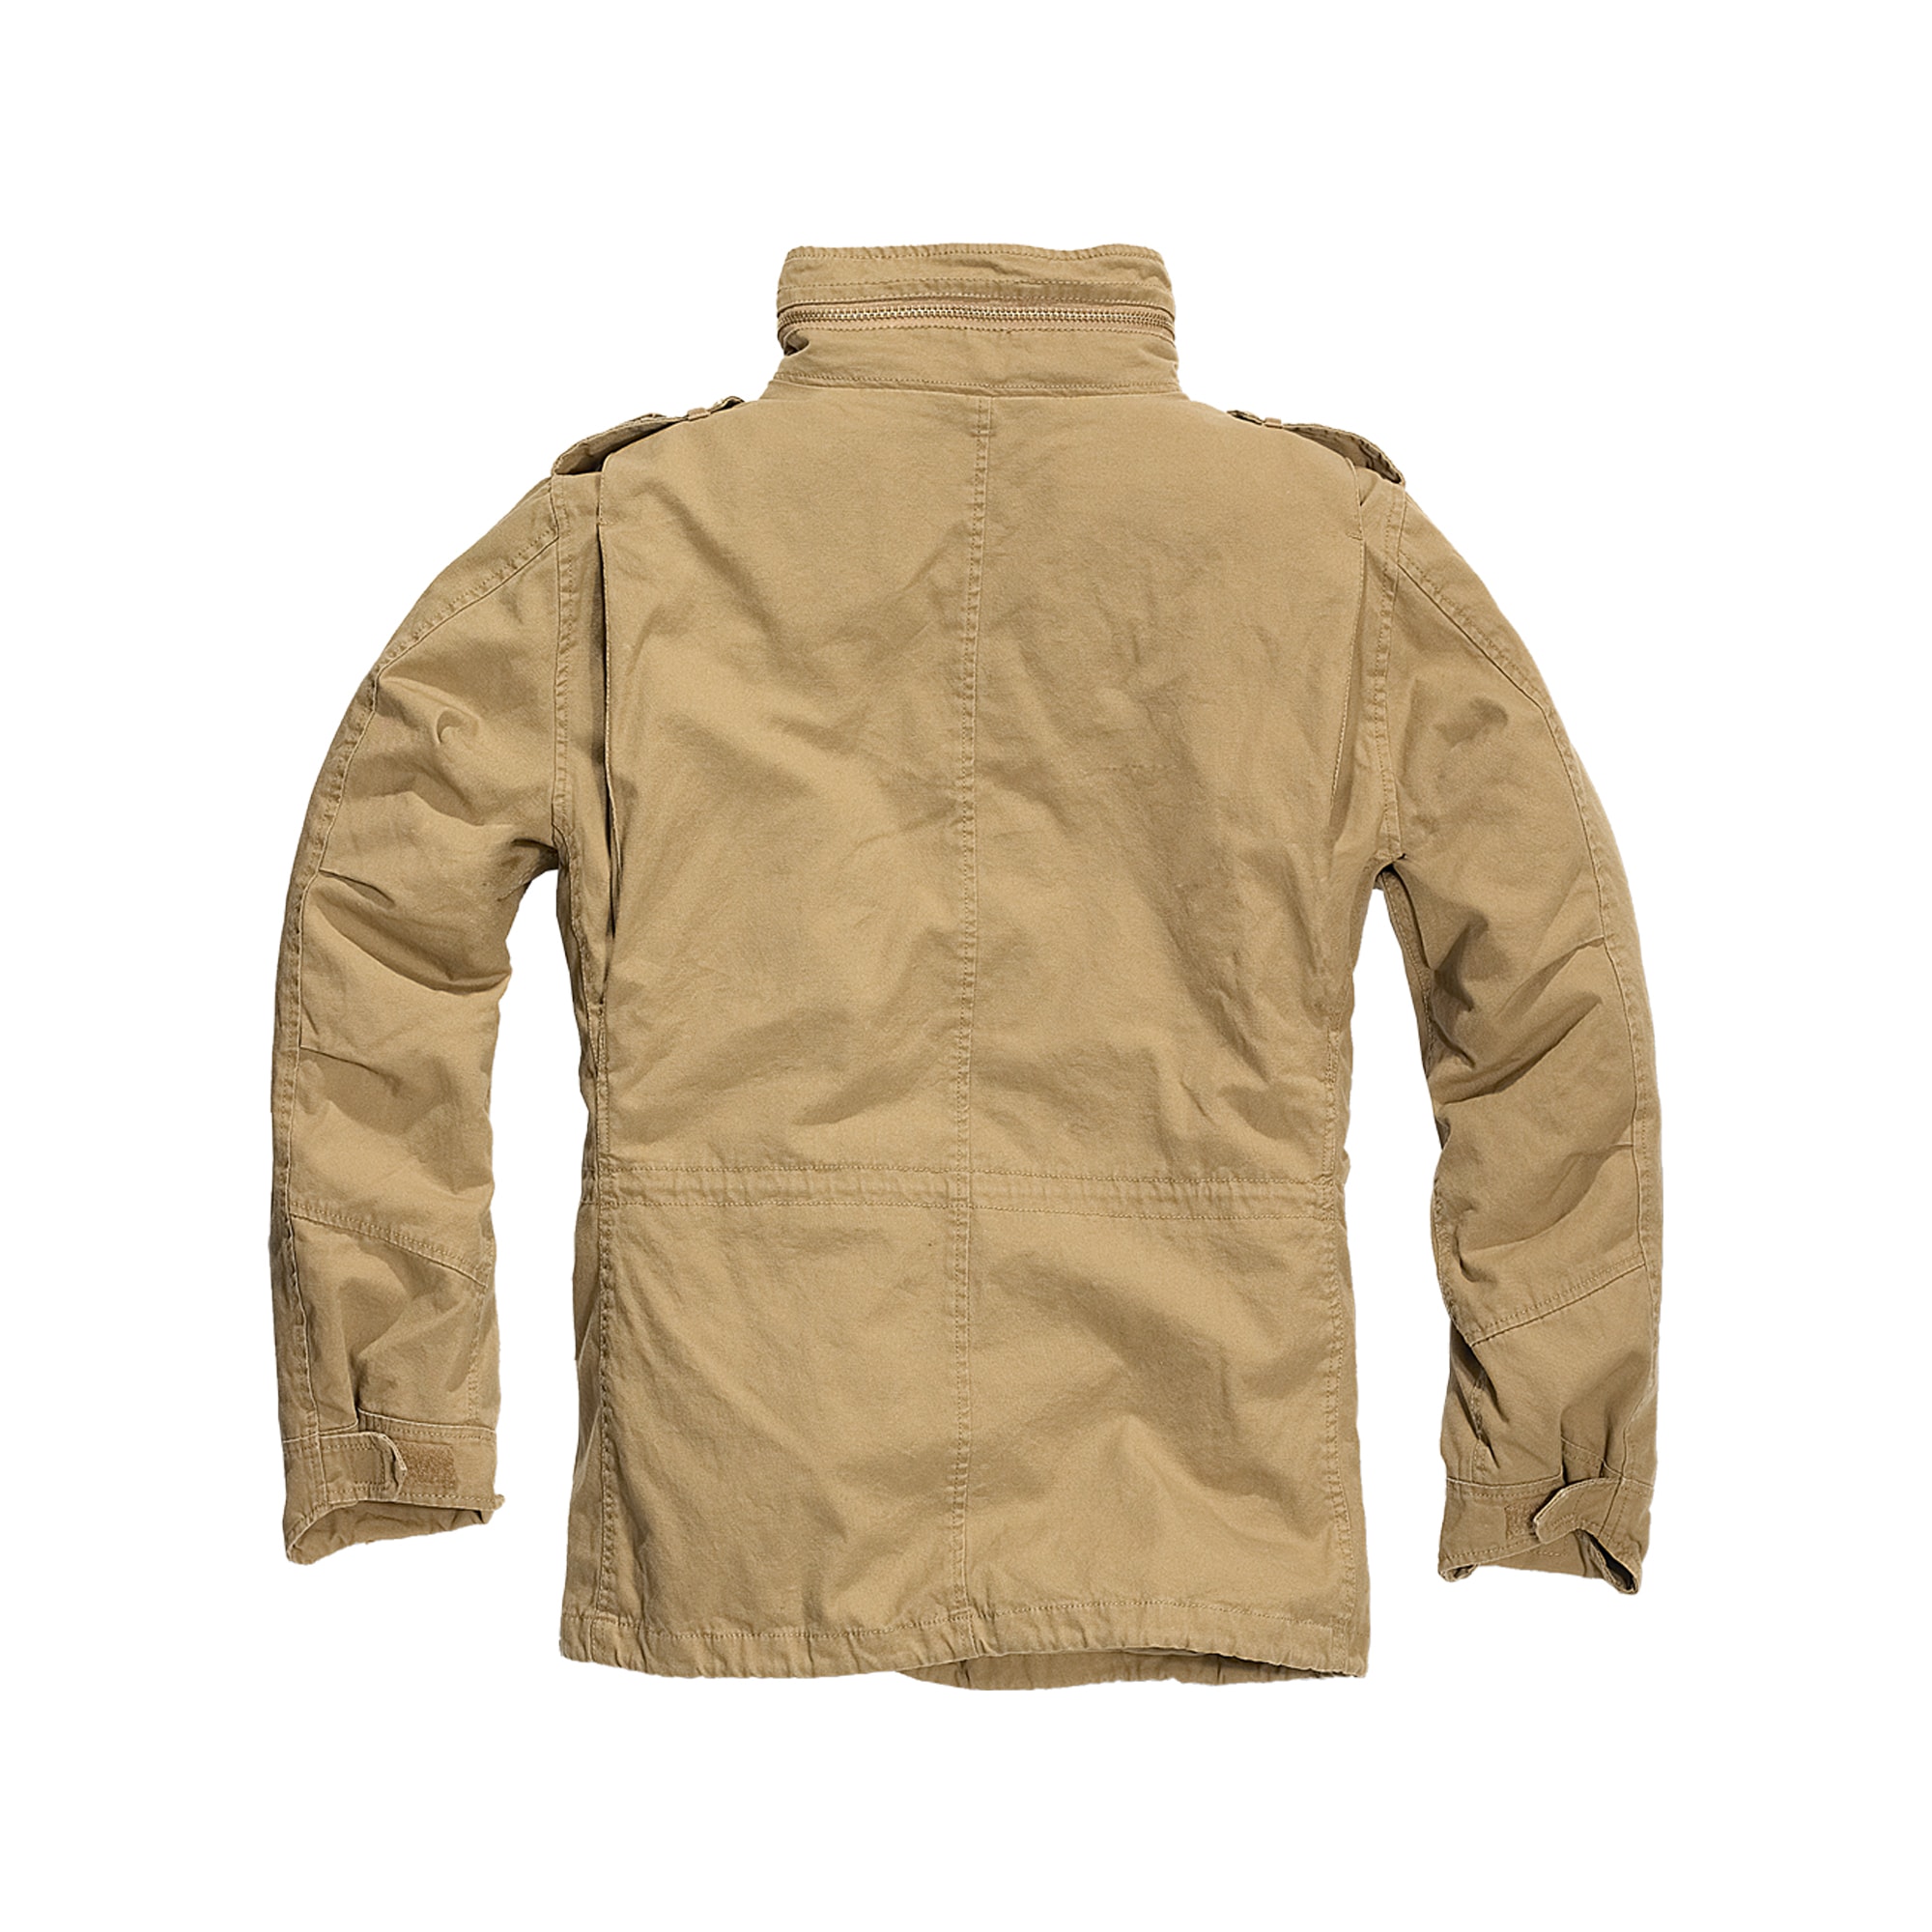 Brandit M-65 by Giant Purchase ASMC Jacket the camel